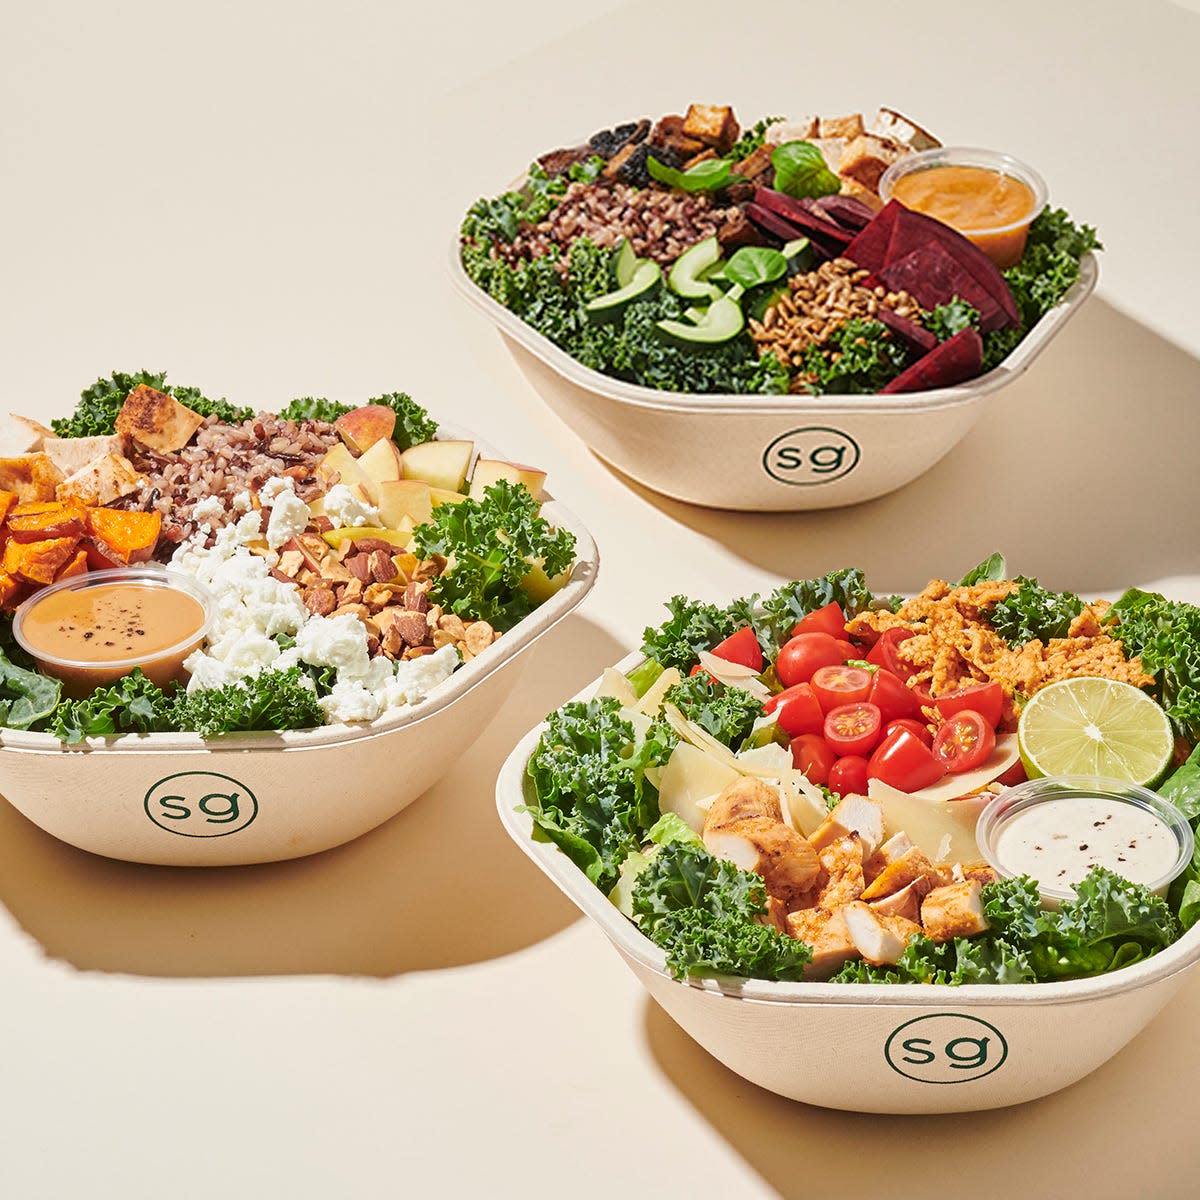 Sweetgreen's menu offers a variety of salads and warm bowls.